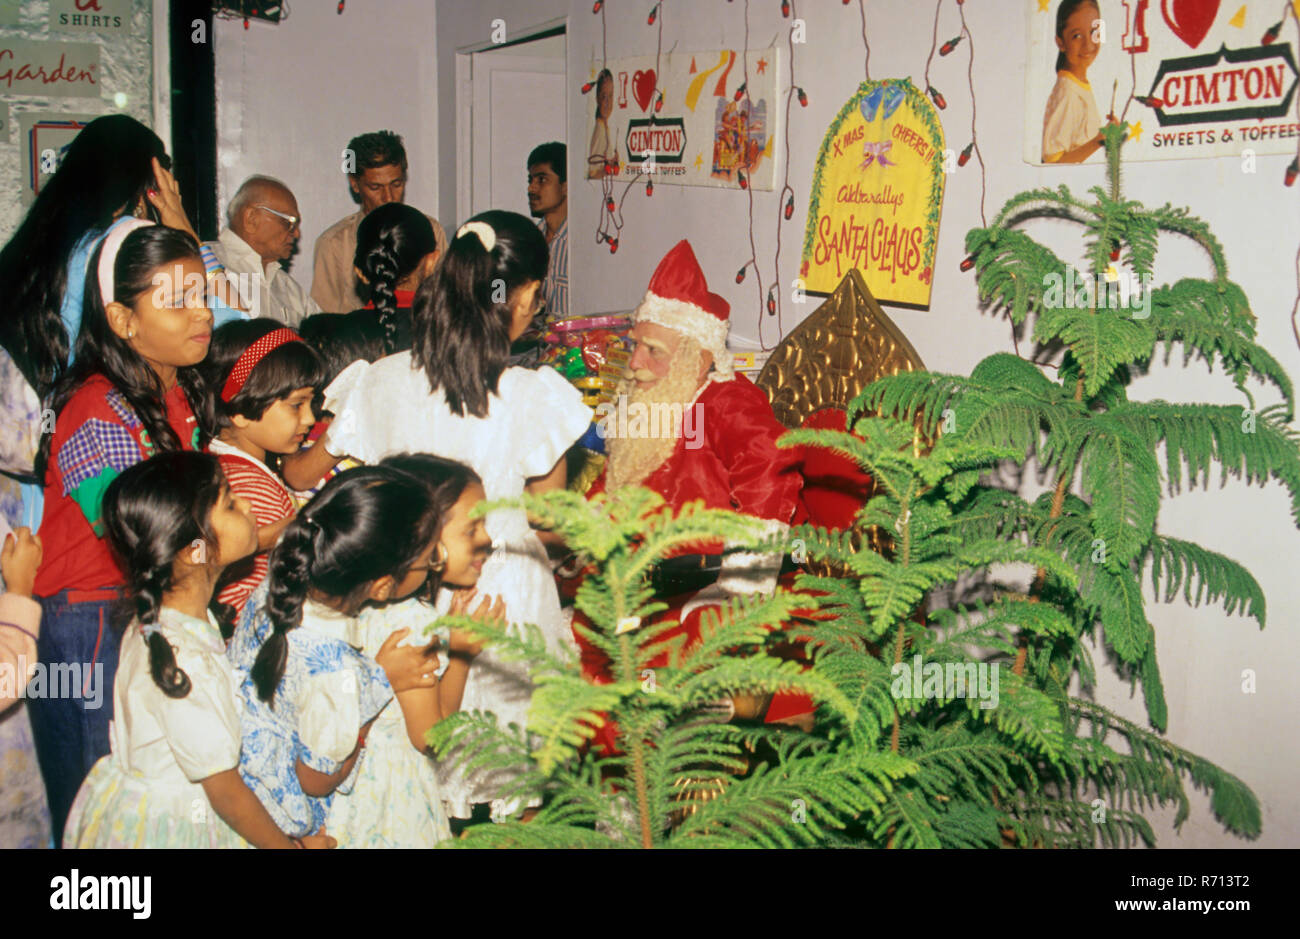 Man wearing costumes and playing character of Santa Clau giving gifts to children on Christmas Occasion Stock Photo